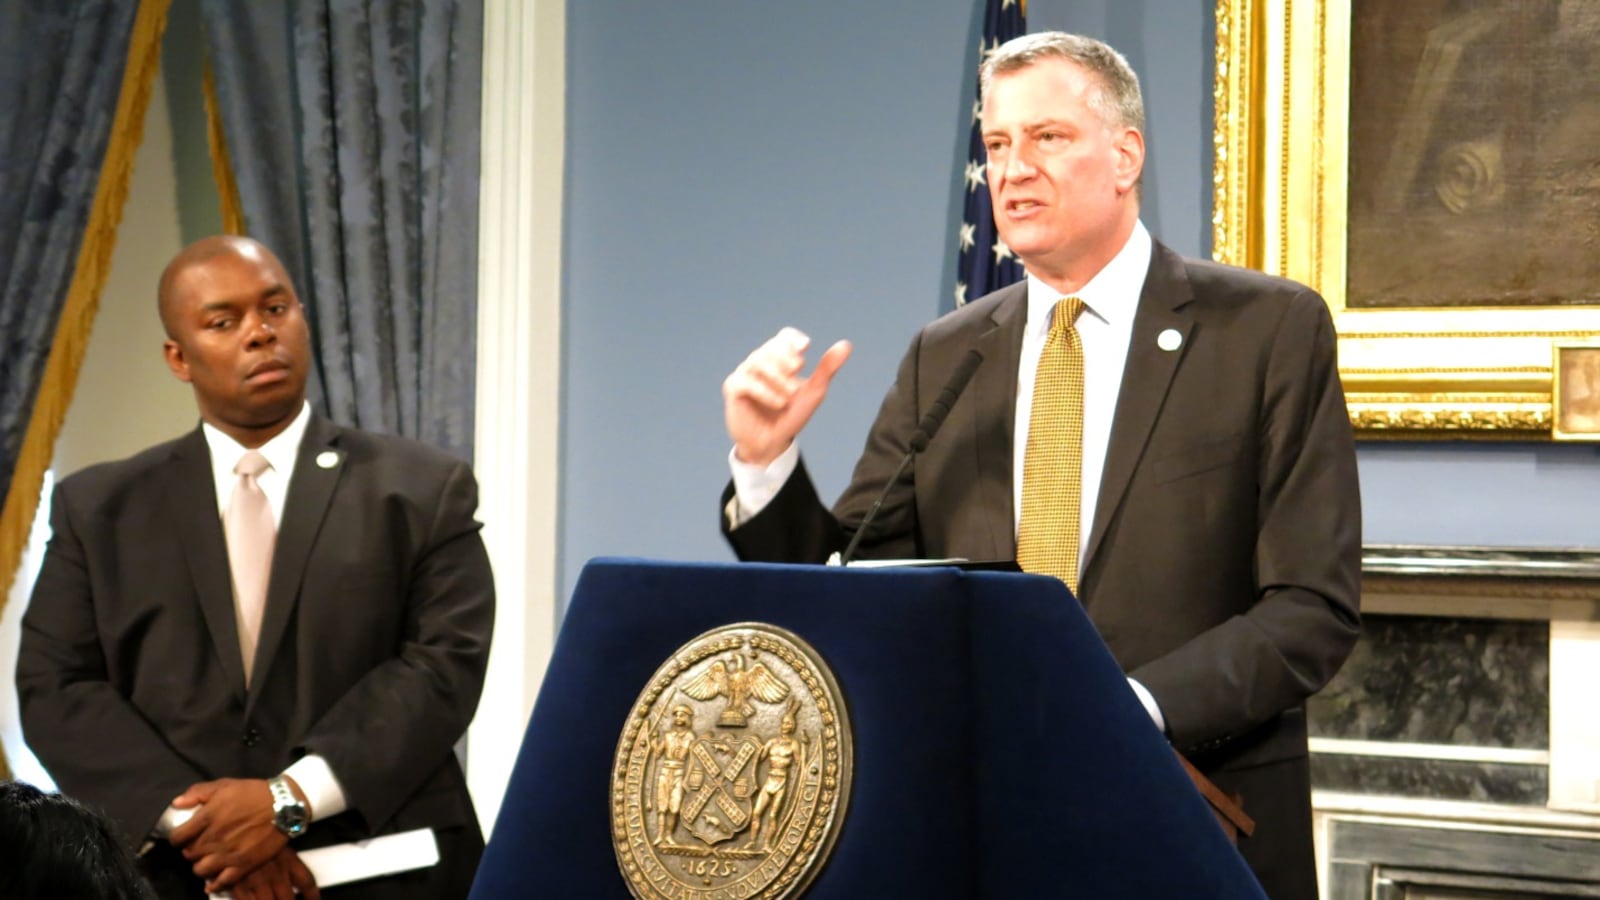 Mayor Bill de Blasio offered new details about his after-school expansion plan, along with Richard Buery, a deputy mayor charged with overseeing the mayor's prekindergarten and after-school initiatives.